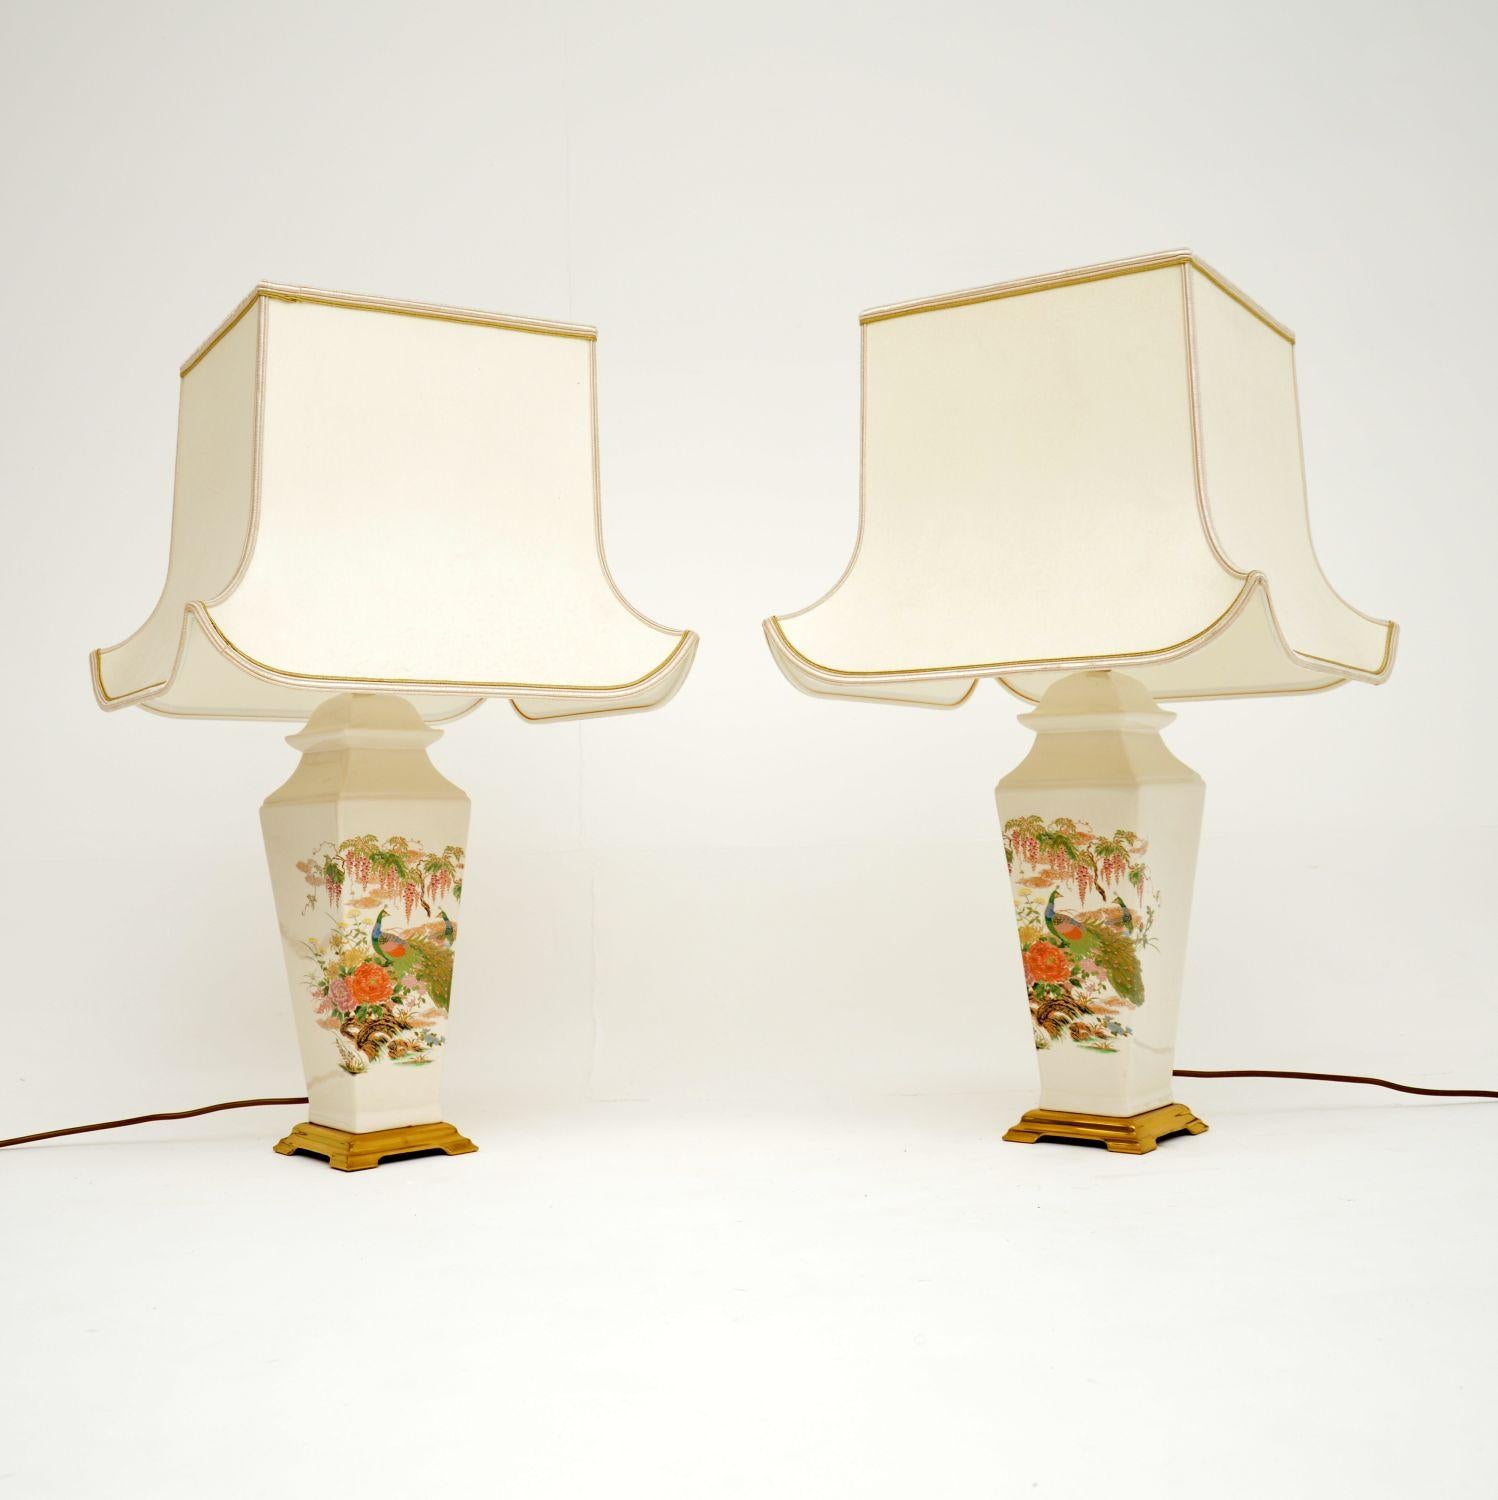 A beautiful pair of high quality vintage table lamps in the antique Chinese style. These were made in England, they date from around the 1970-80’s.

They are very well made and are an impressive size. They are a lovely colour and are beautifully